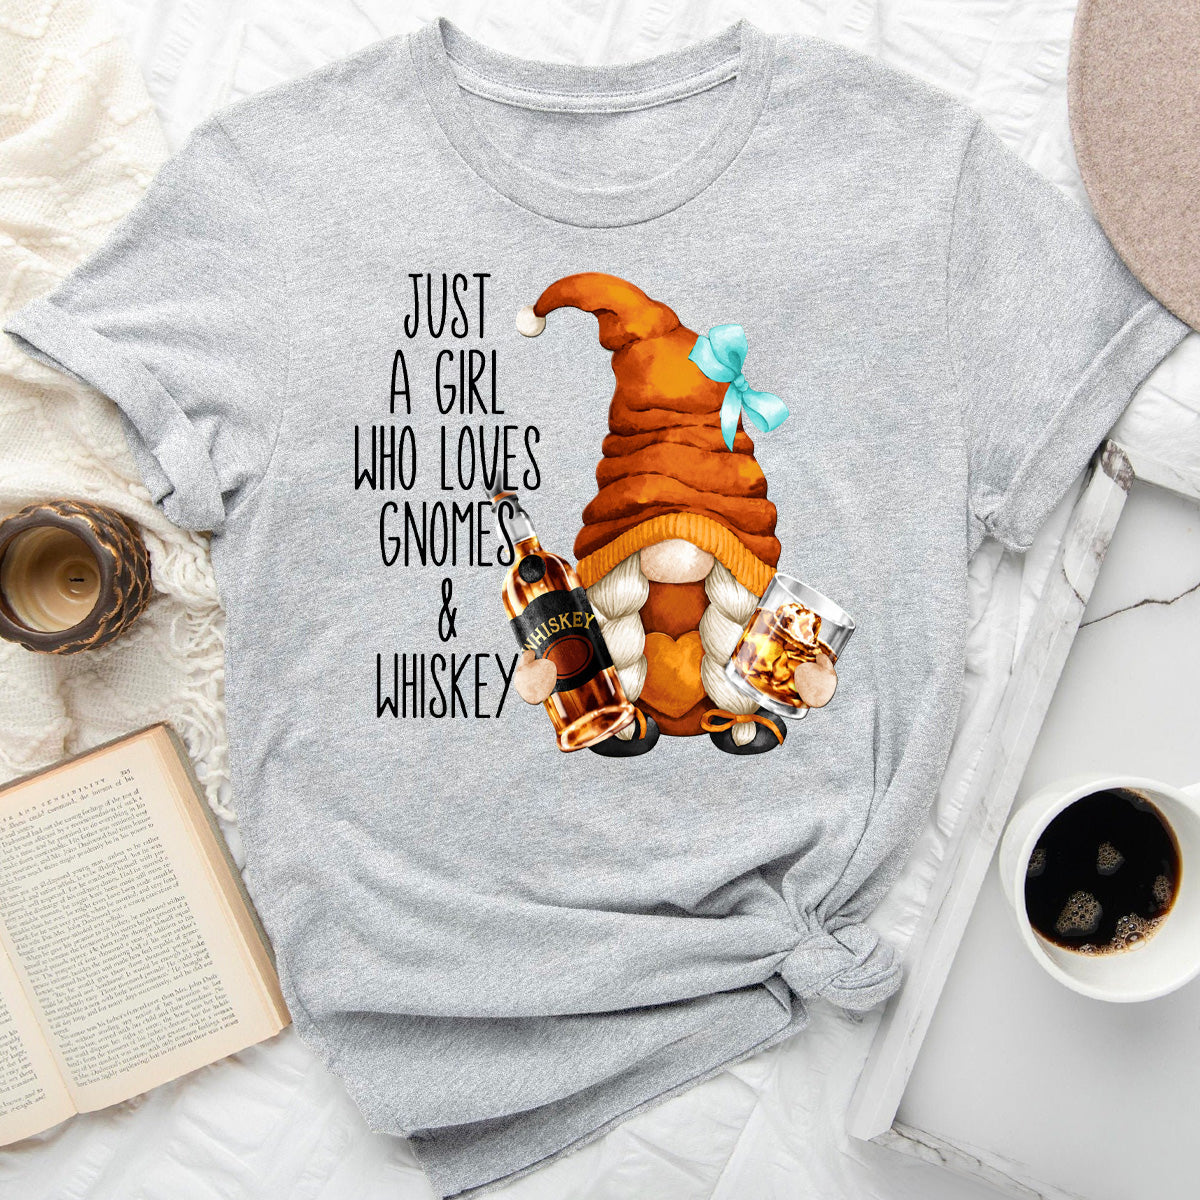 Just a Girl Who Loves Gnomes and Whiskey T-Shirt